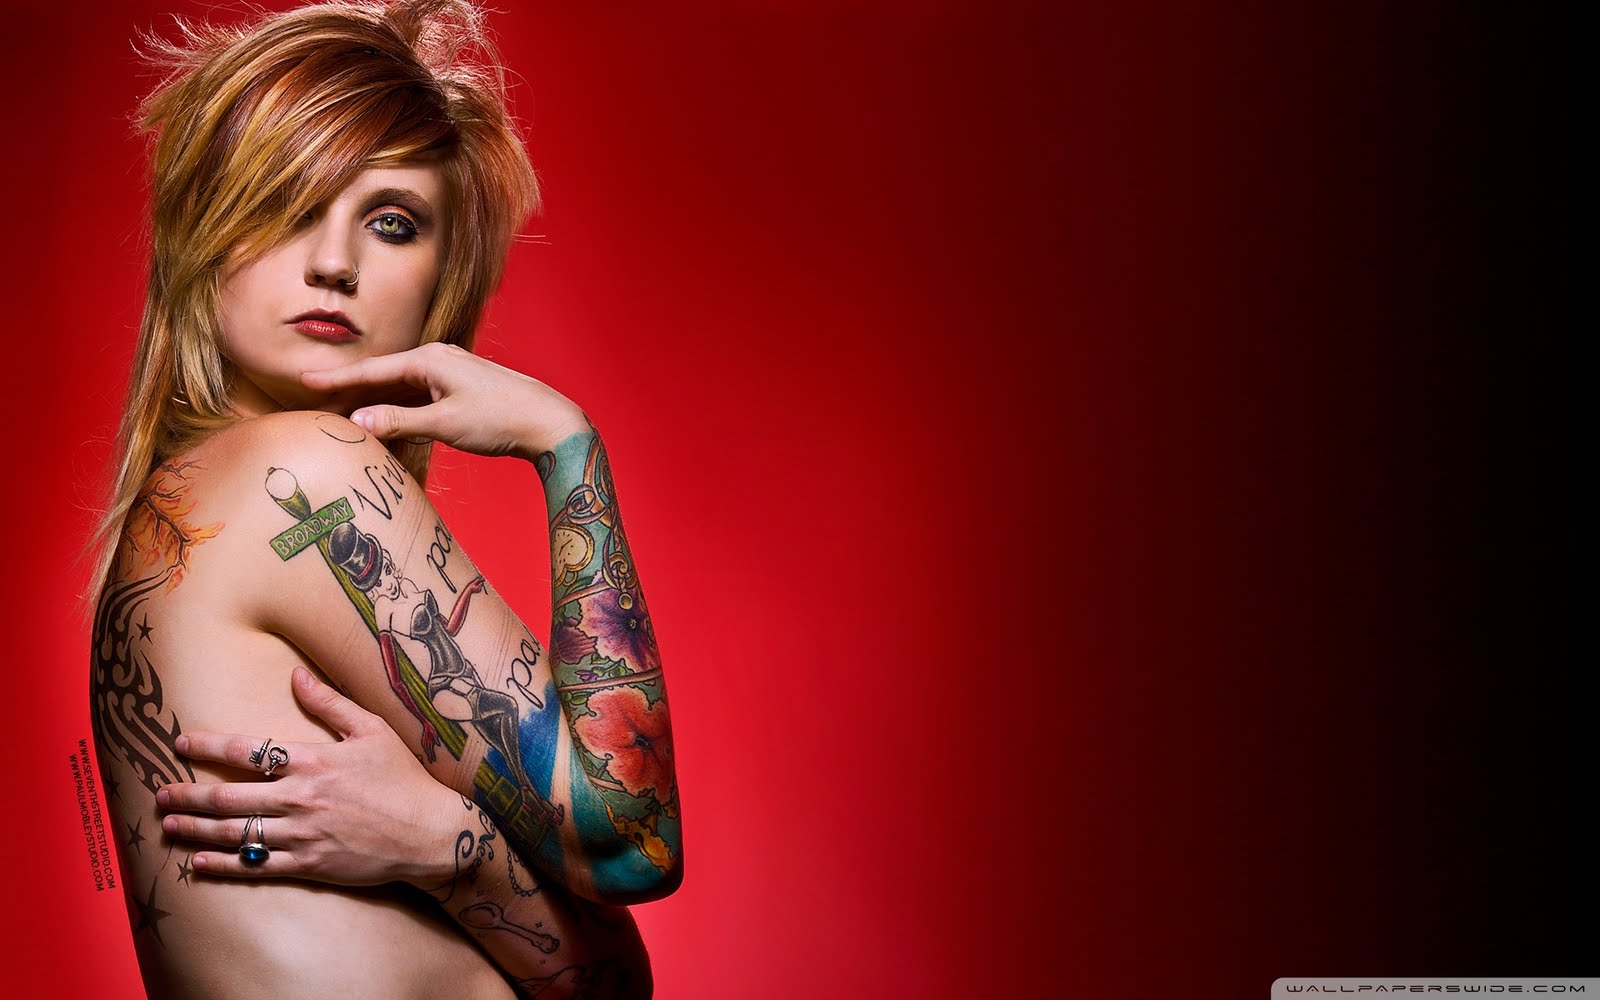 Wallpapershdsize Tattoo Gallery Hot Babes Sexy Devils And Pinup Girls Wallpapers